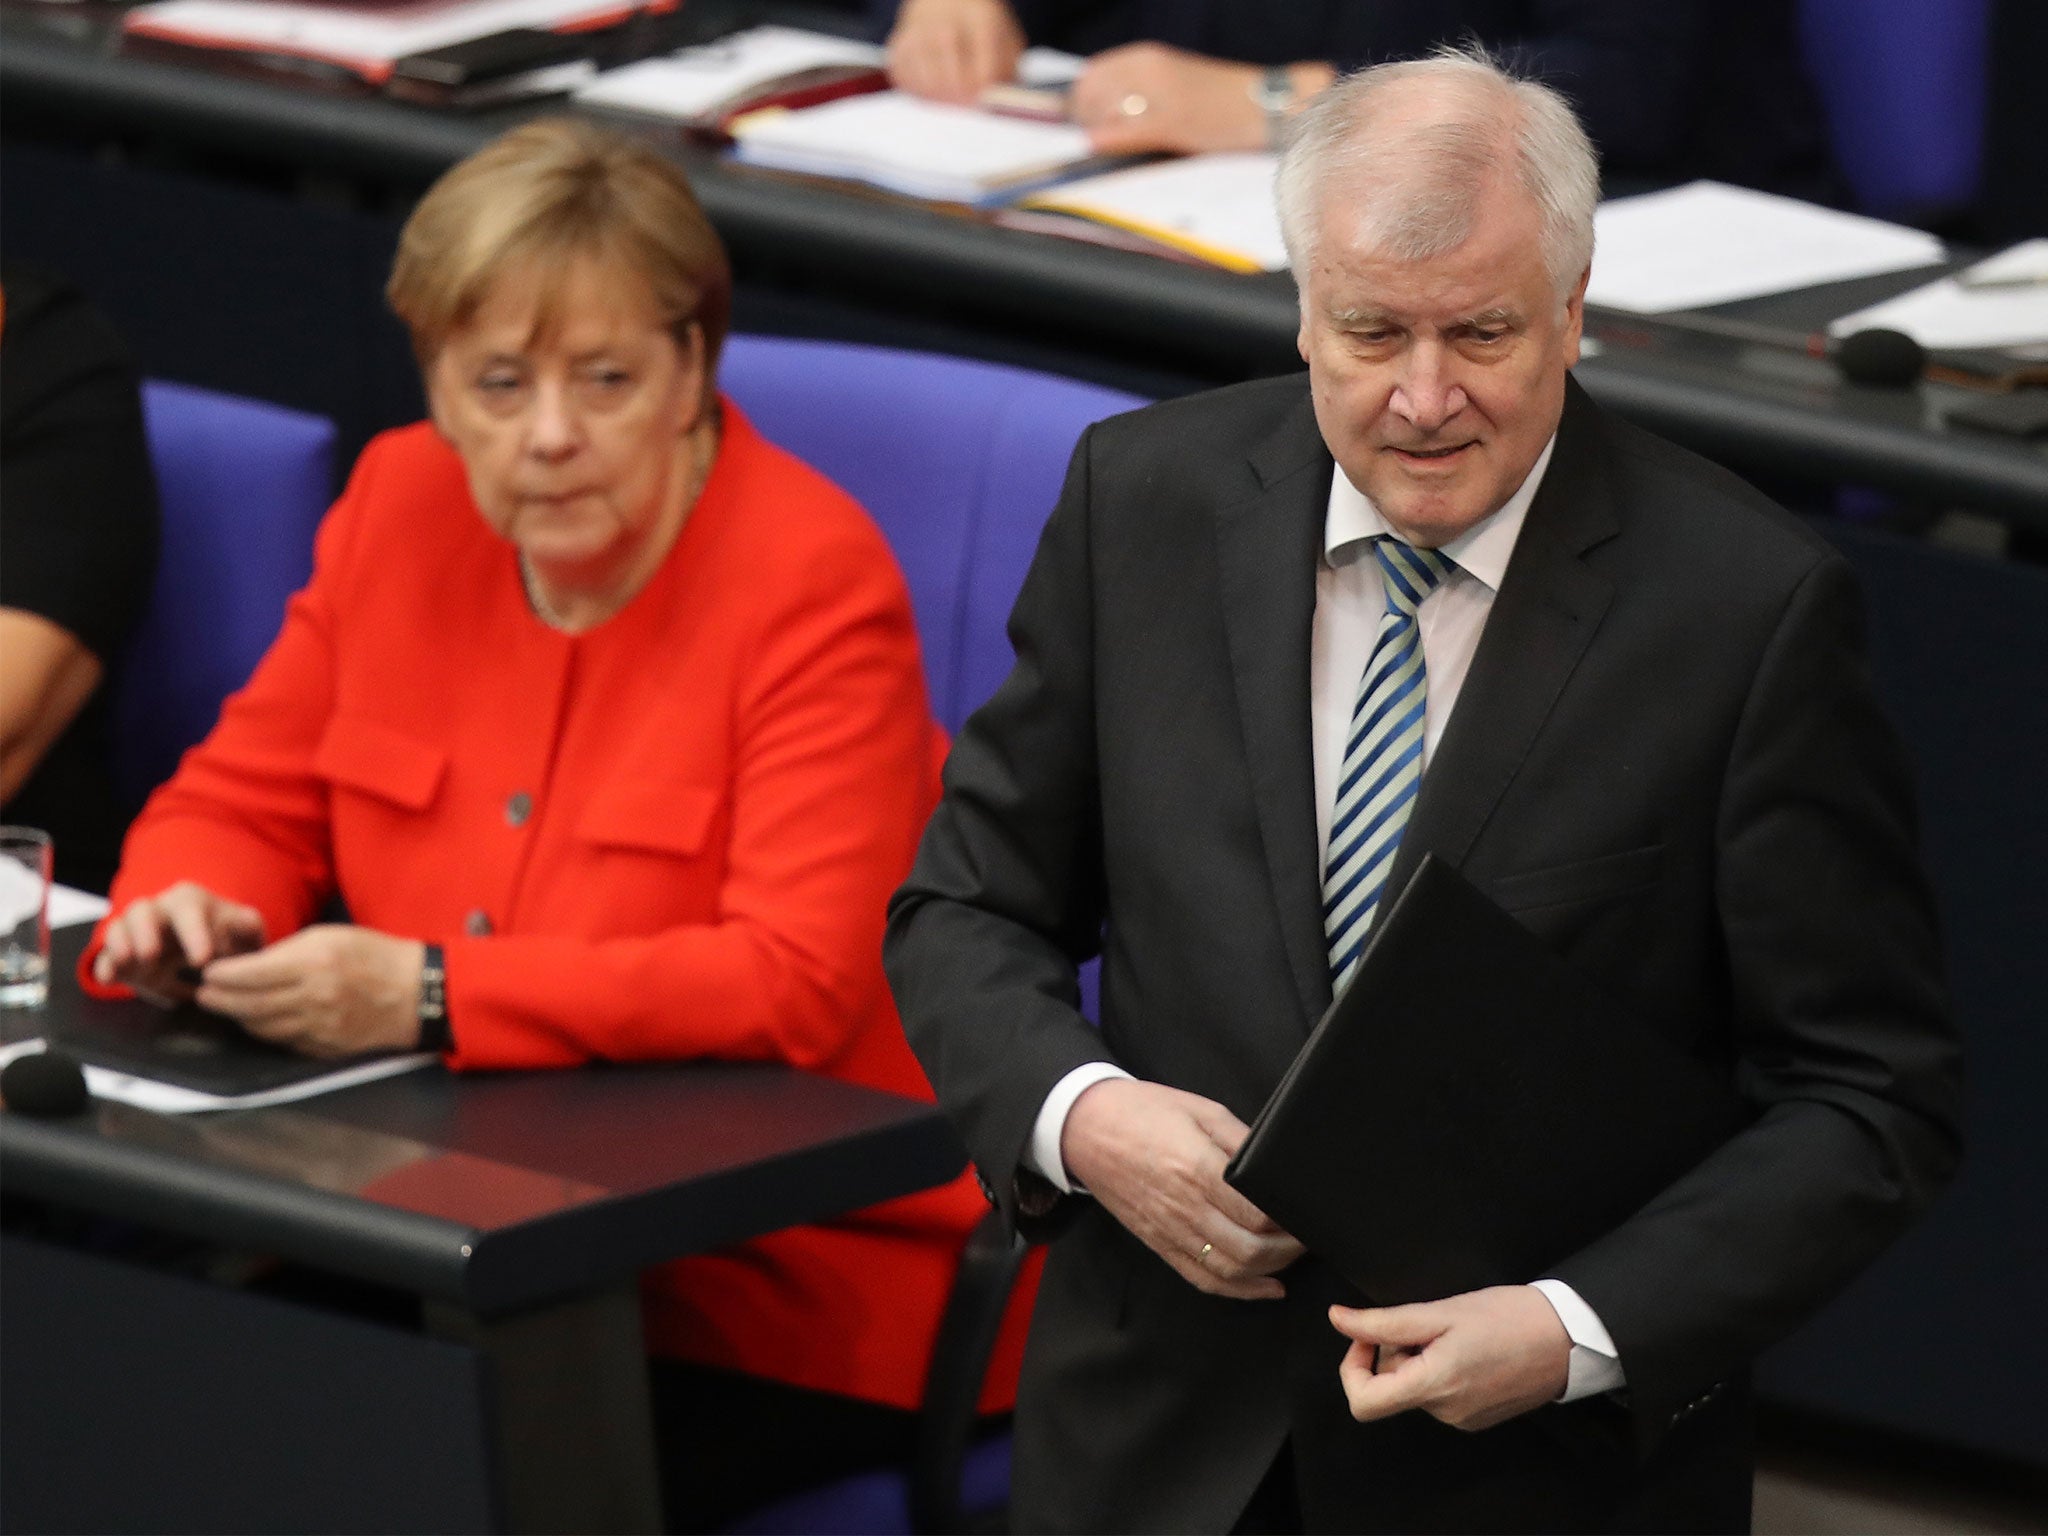 Horst Seehofer threatened to resign as interior minister at the height of his row over migration with Angela Merkel